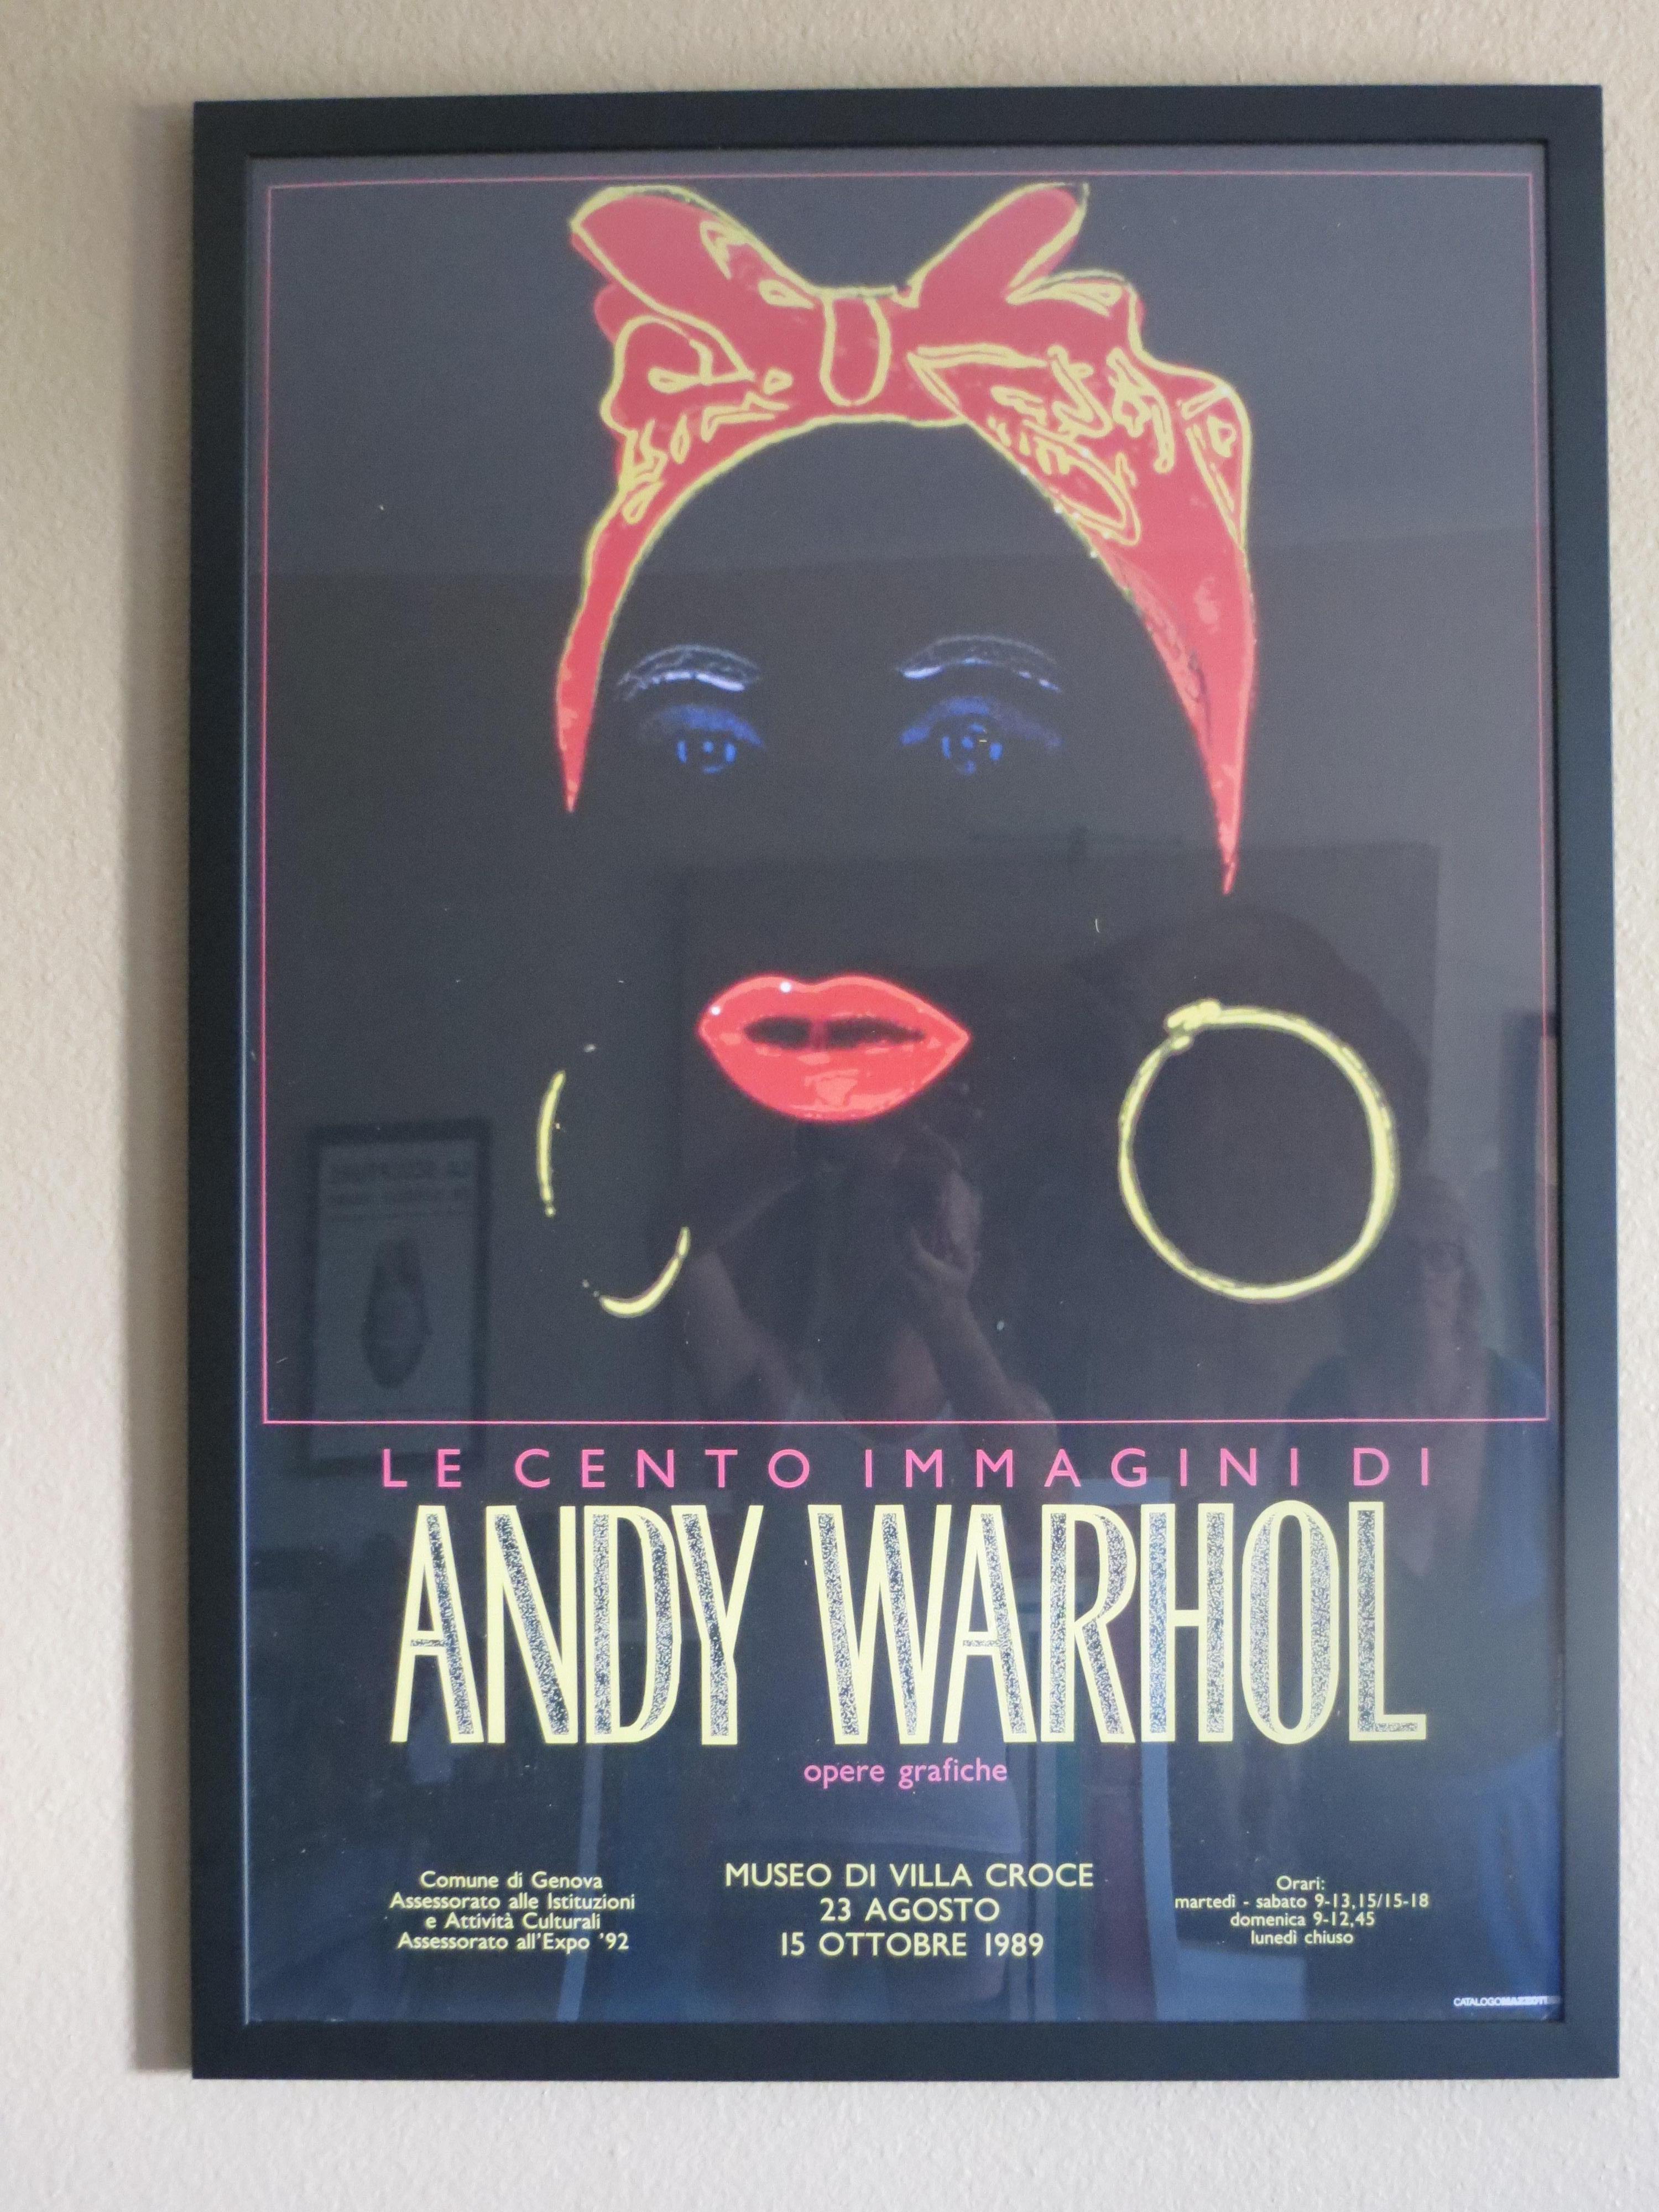 Andy Warhol Exhibition Poster,  Le Cento Imagini Di Andy Warhol.
Edited by The Museo of The Villa Croce in 1989
Excellent condition
Size is framed 

Andy Warhol (1928-1987) became a leading artist in the Pop Art movement of the 1960s. 
His artistic